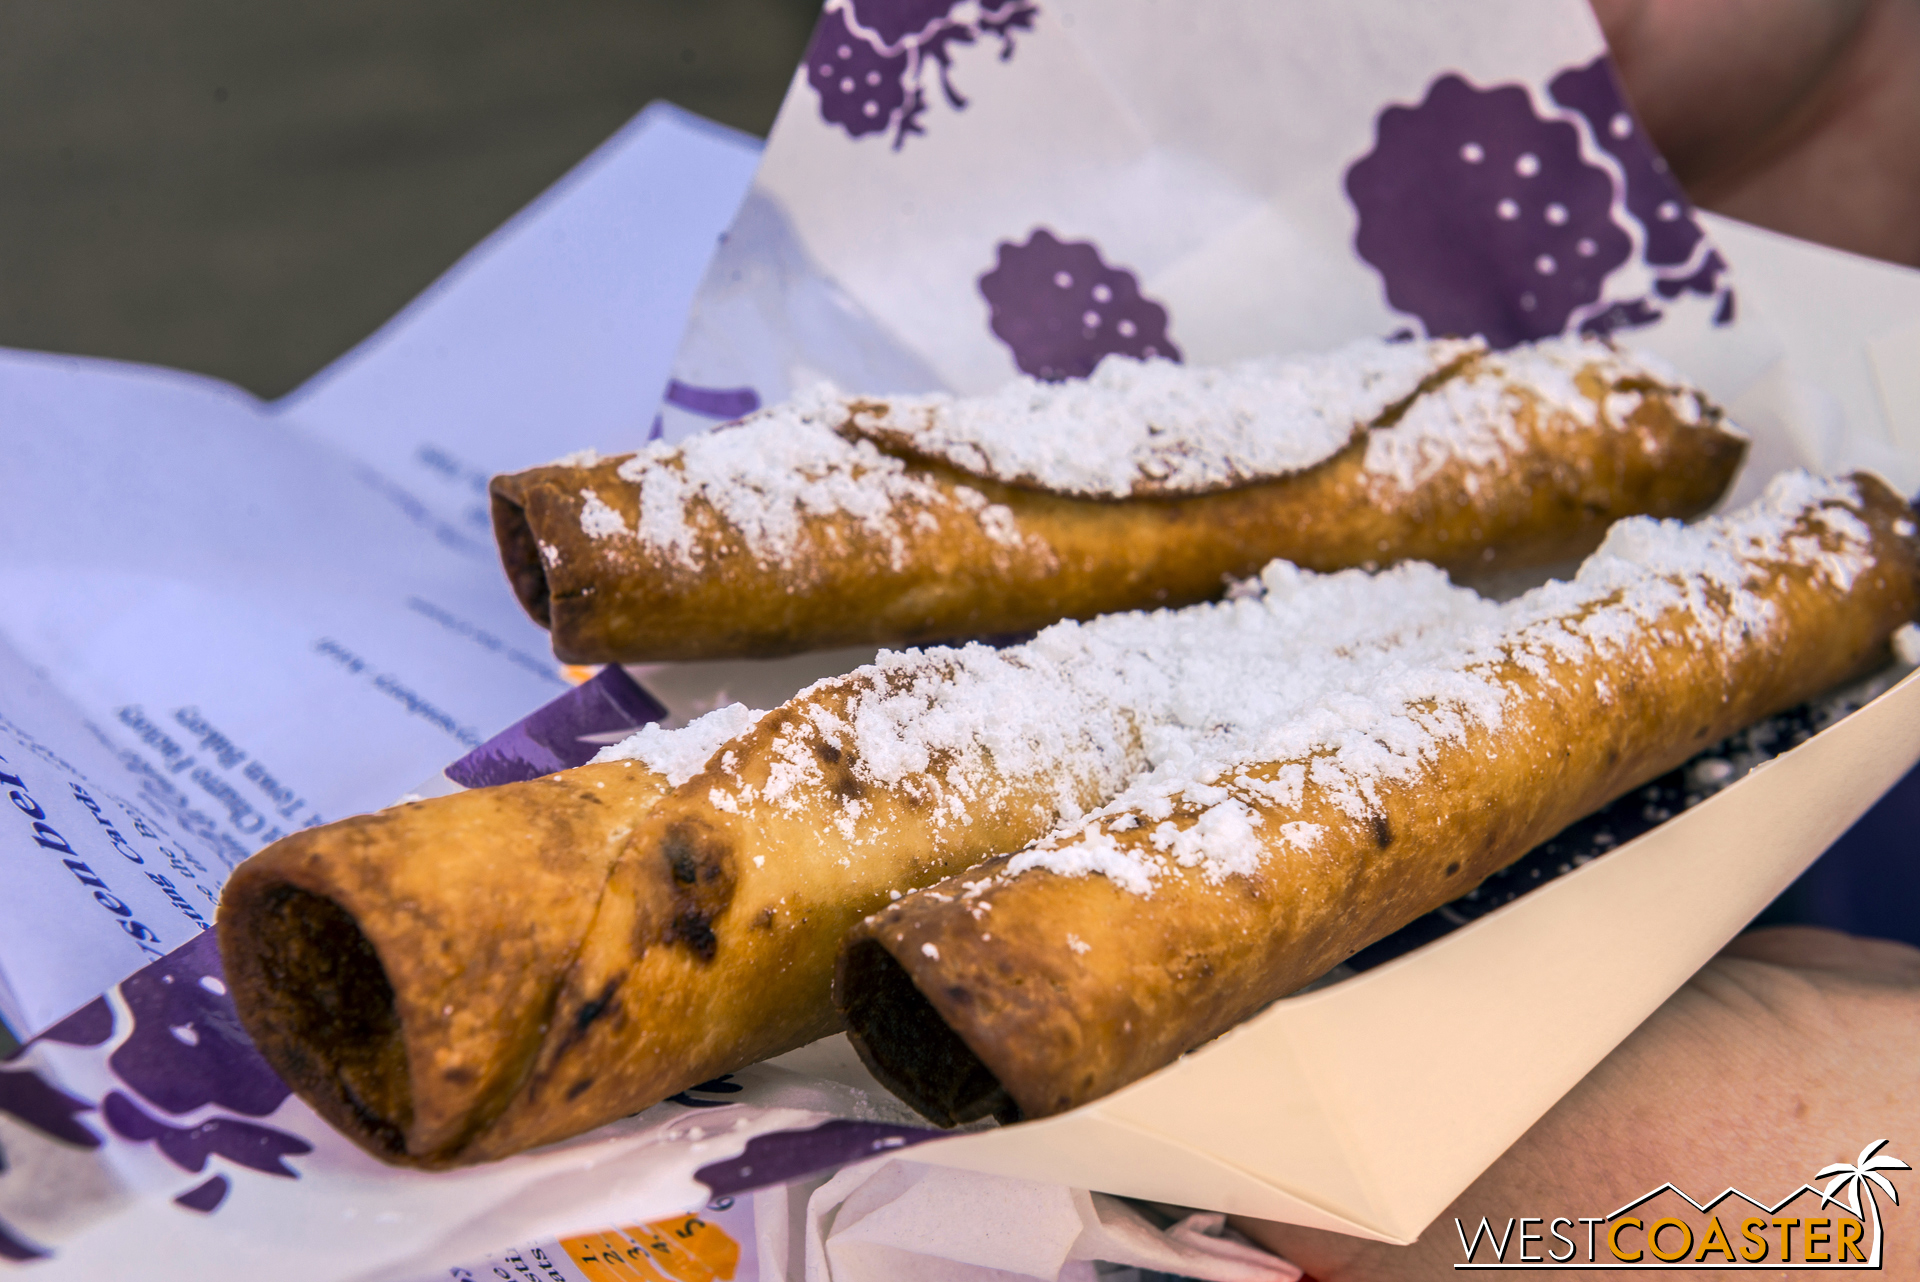  Boysenberry Flautas are not part of the tasting card.&nbsp; Instead, they can be found at Ghost Town Grub, along with the Fun Bun and Fun Stick.&nbsp; Think of these as fruit filling taquitos. 